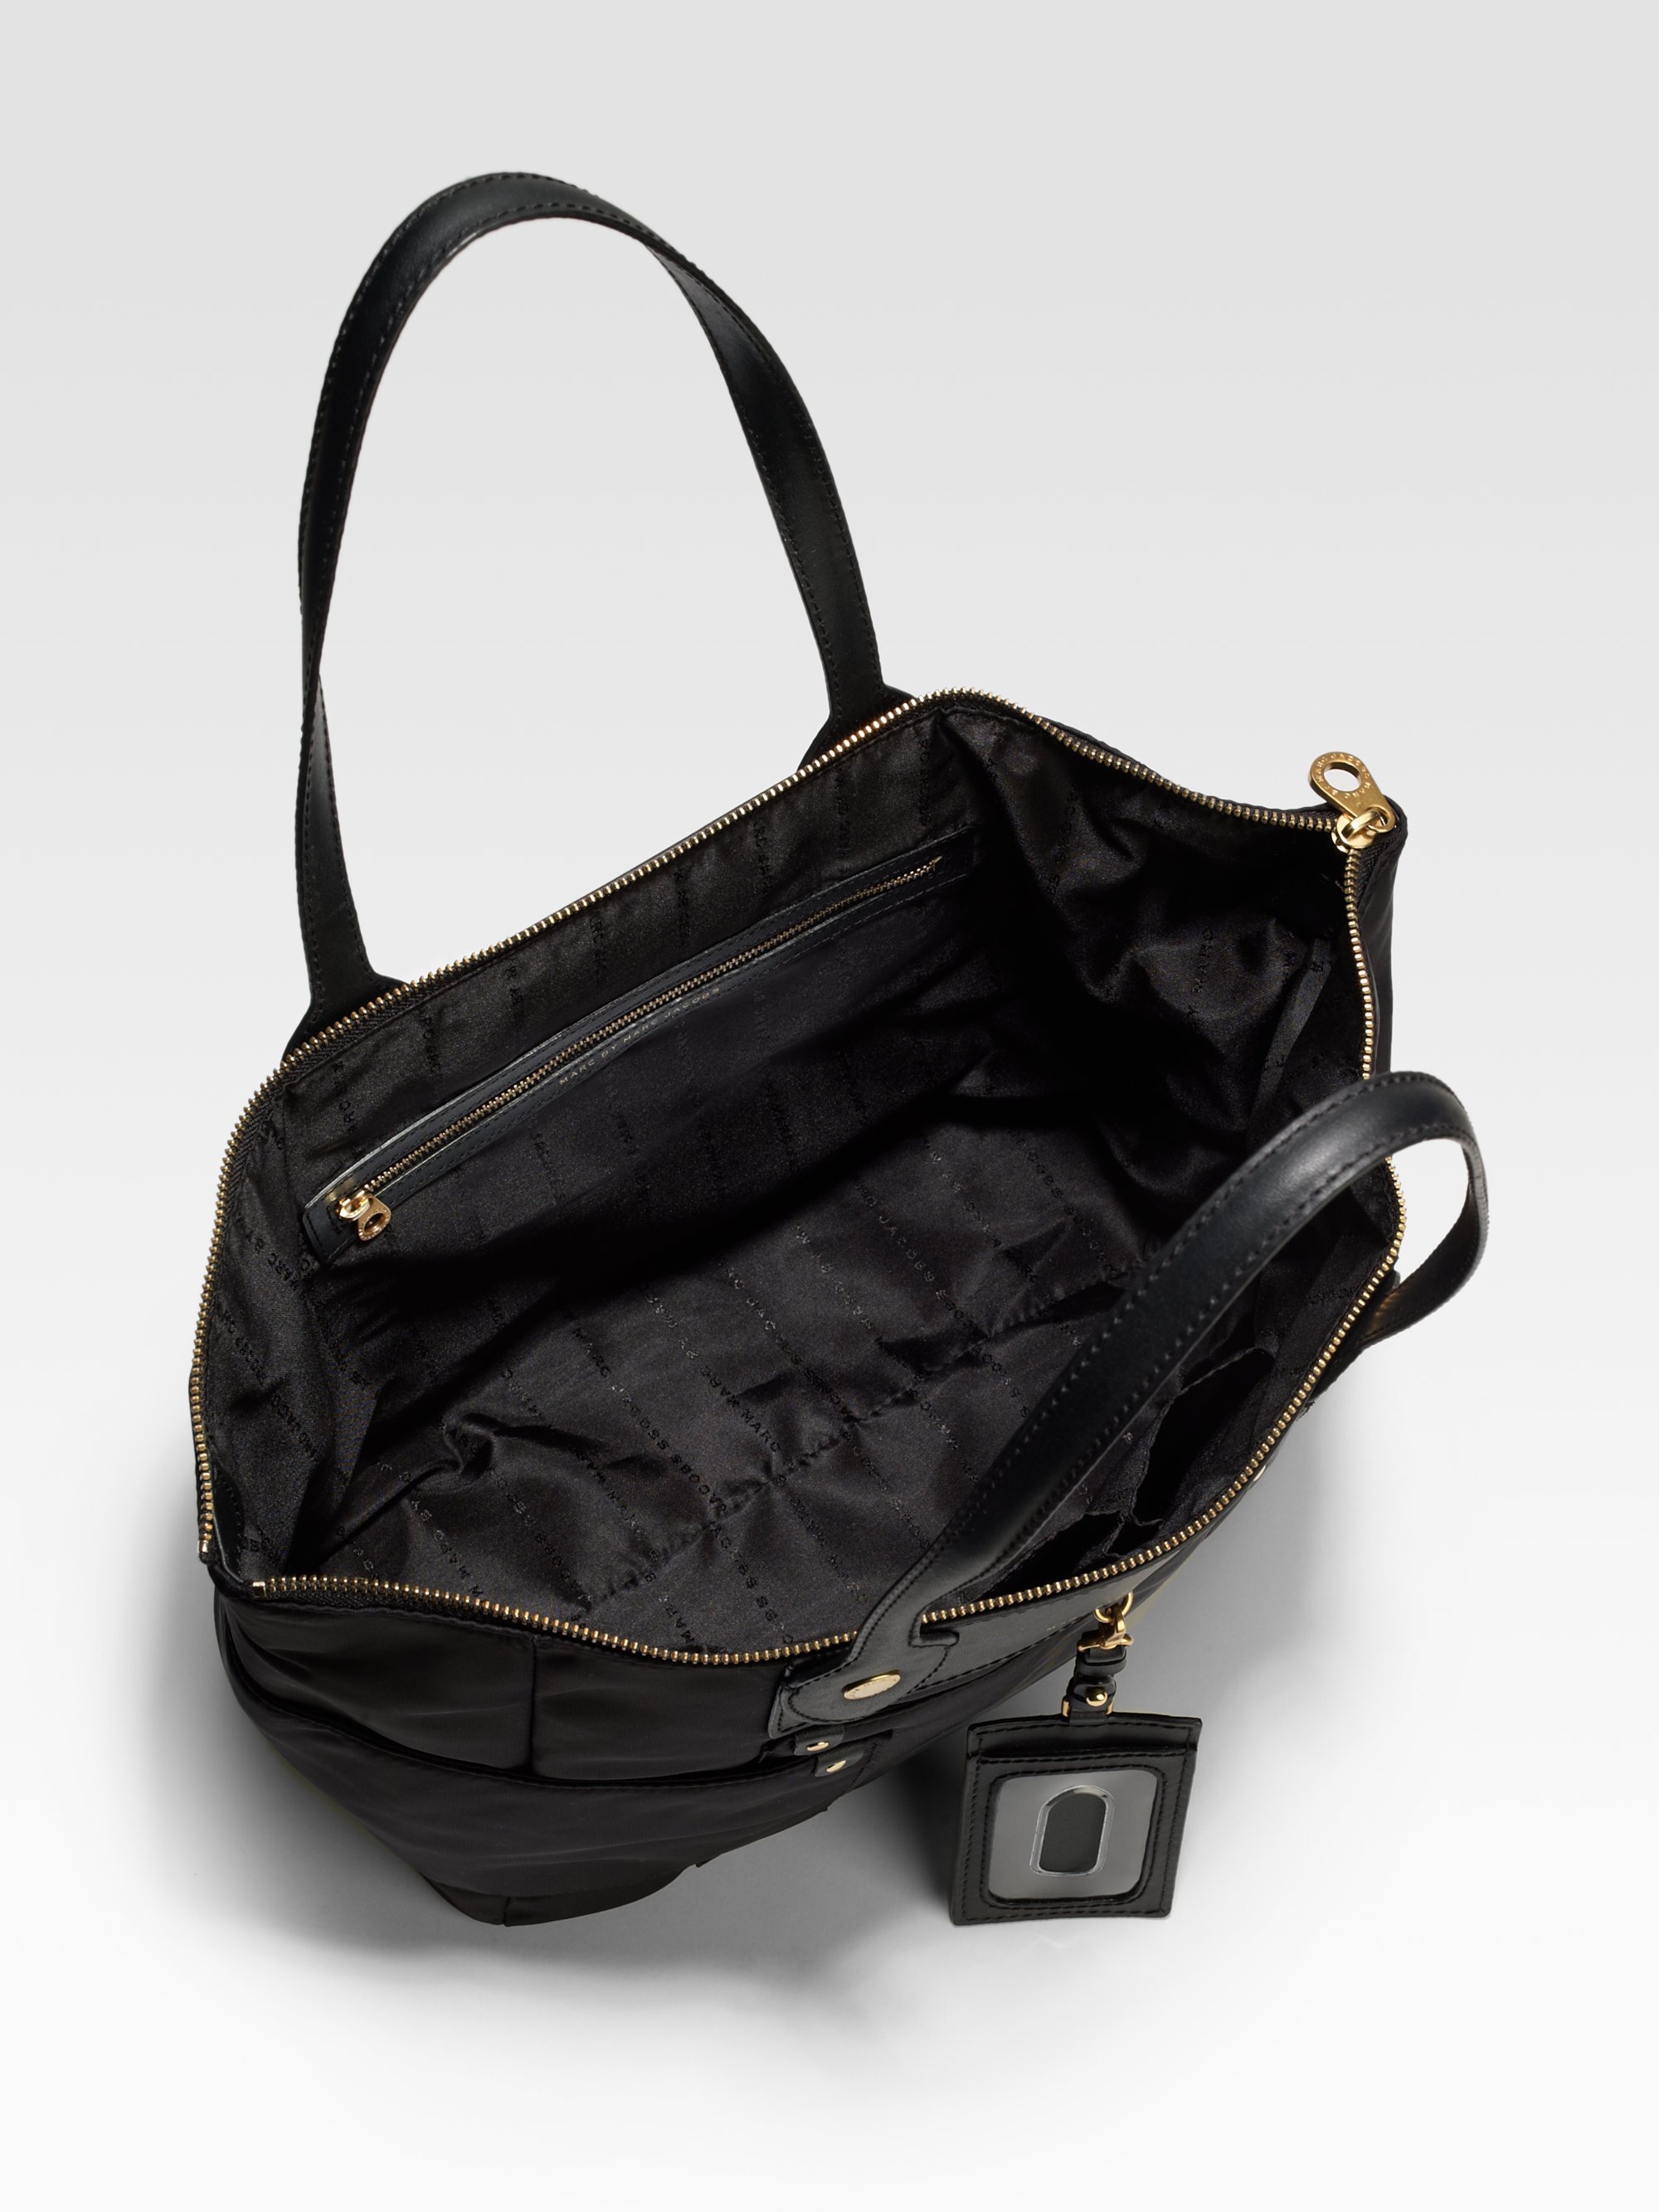 Marc By Marc Jacobs Nylon Leather Tote Bag in Black - Lyst